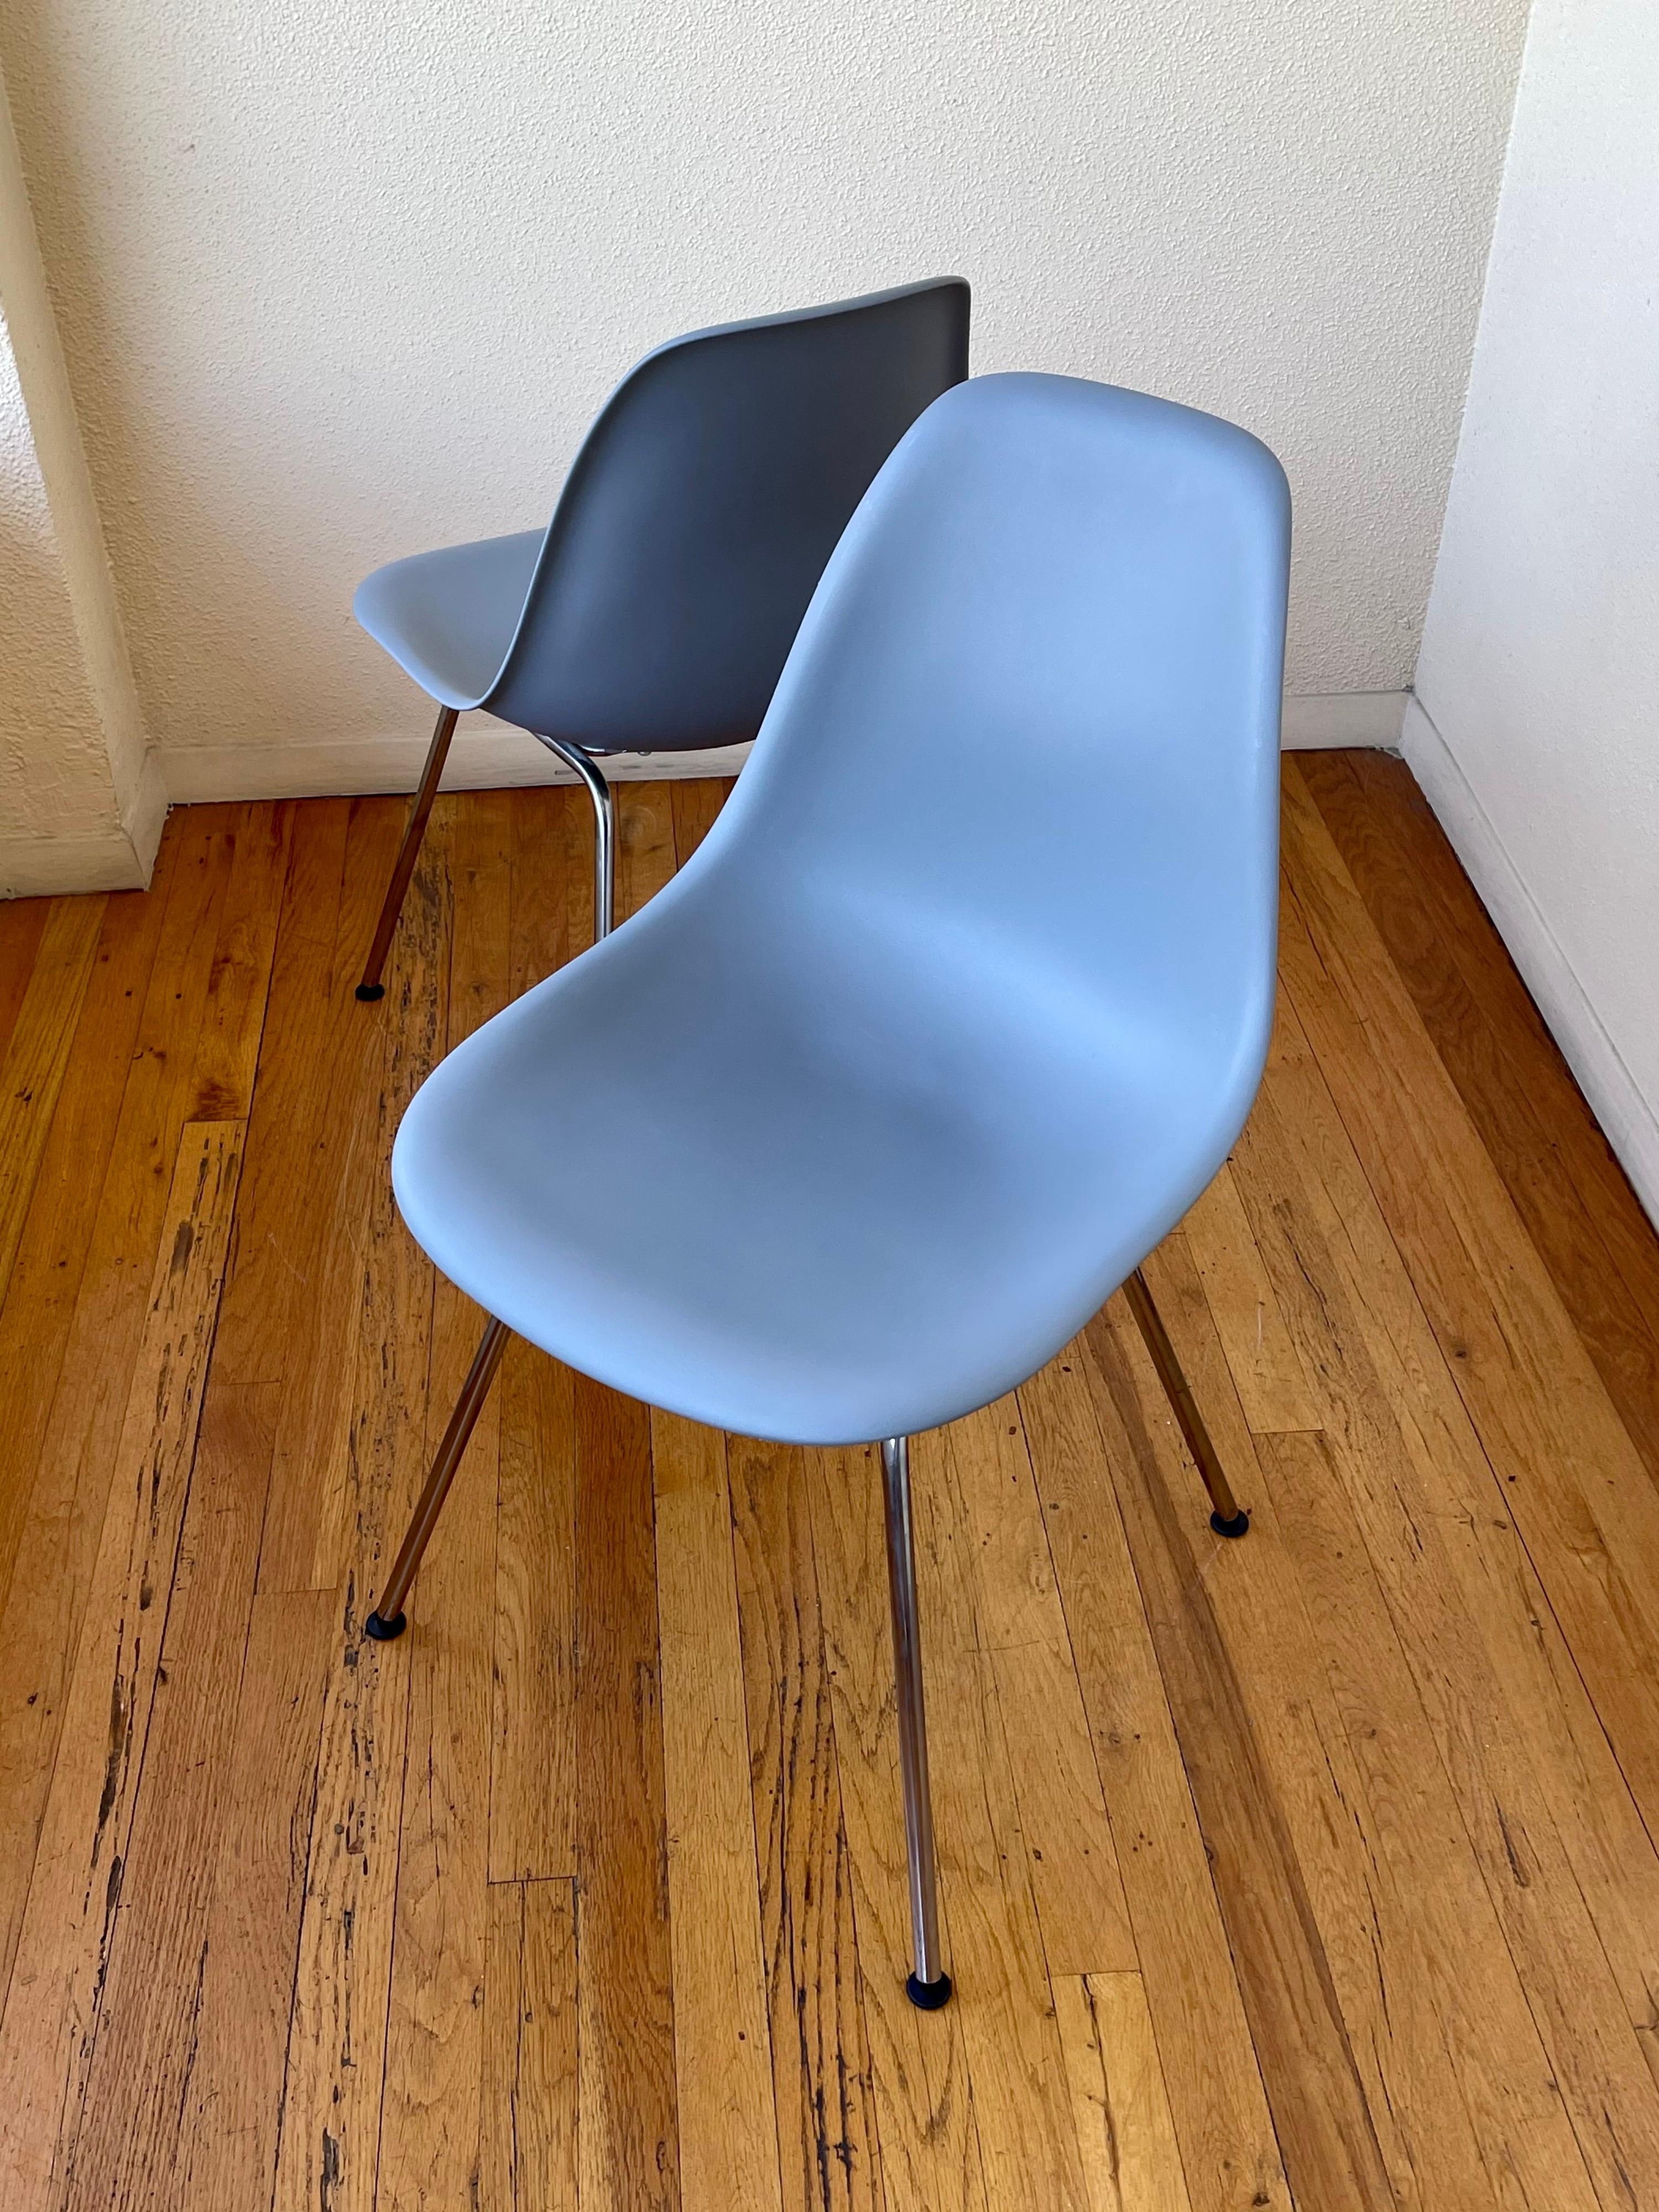 Great pair of molded plastic with chrome bases chairs designed by Eames for Herman Miller nice condition light wear. Produced in 2011, with a “Certificate of Authenticity” in Greystone color.